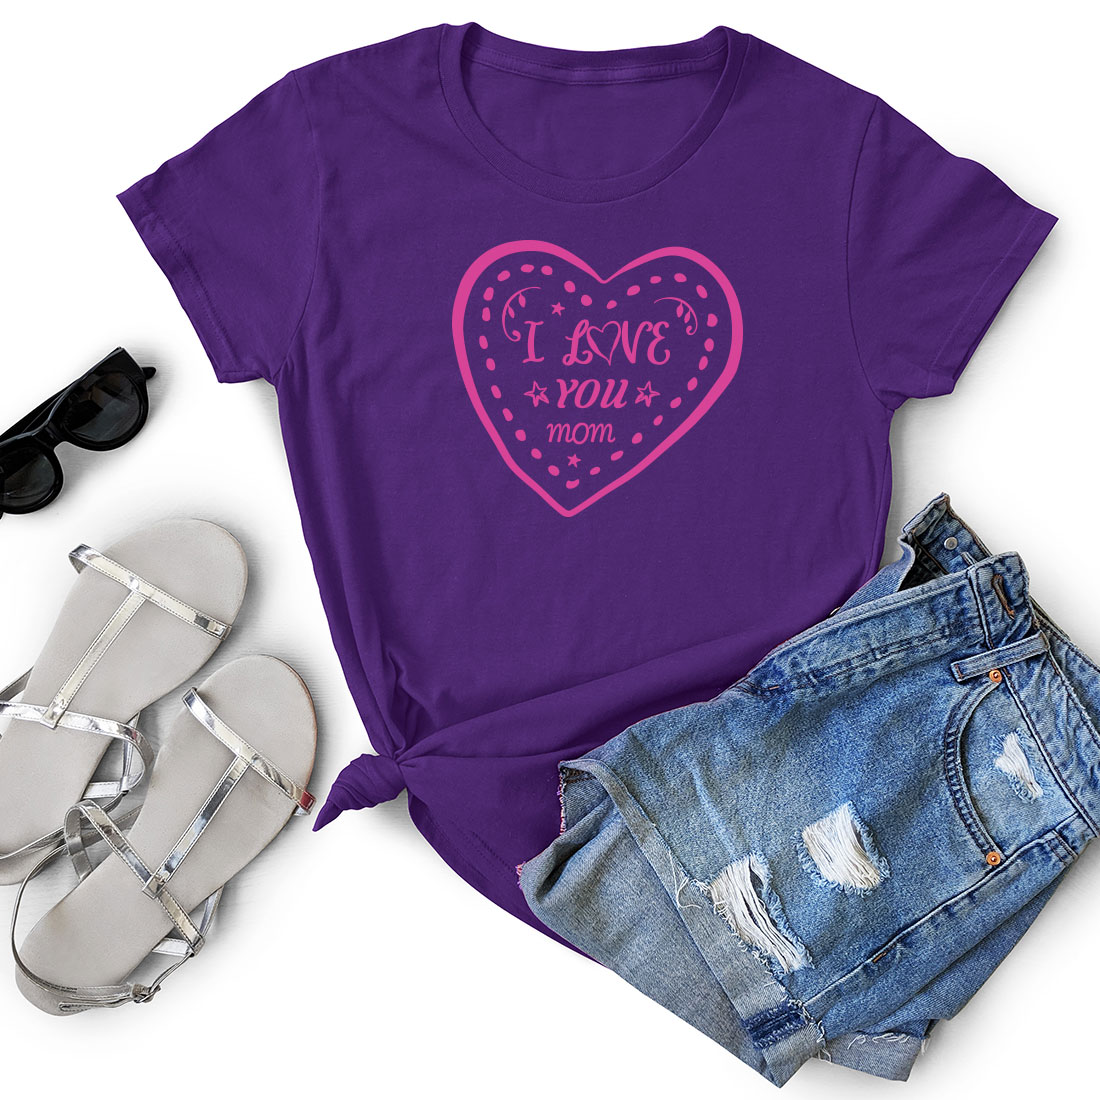 T - shirt with a heart and a pair of shorts.